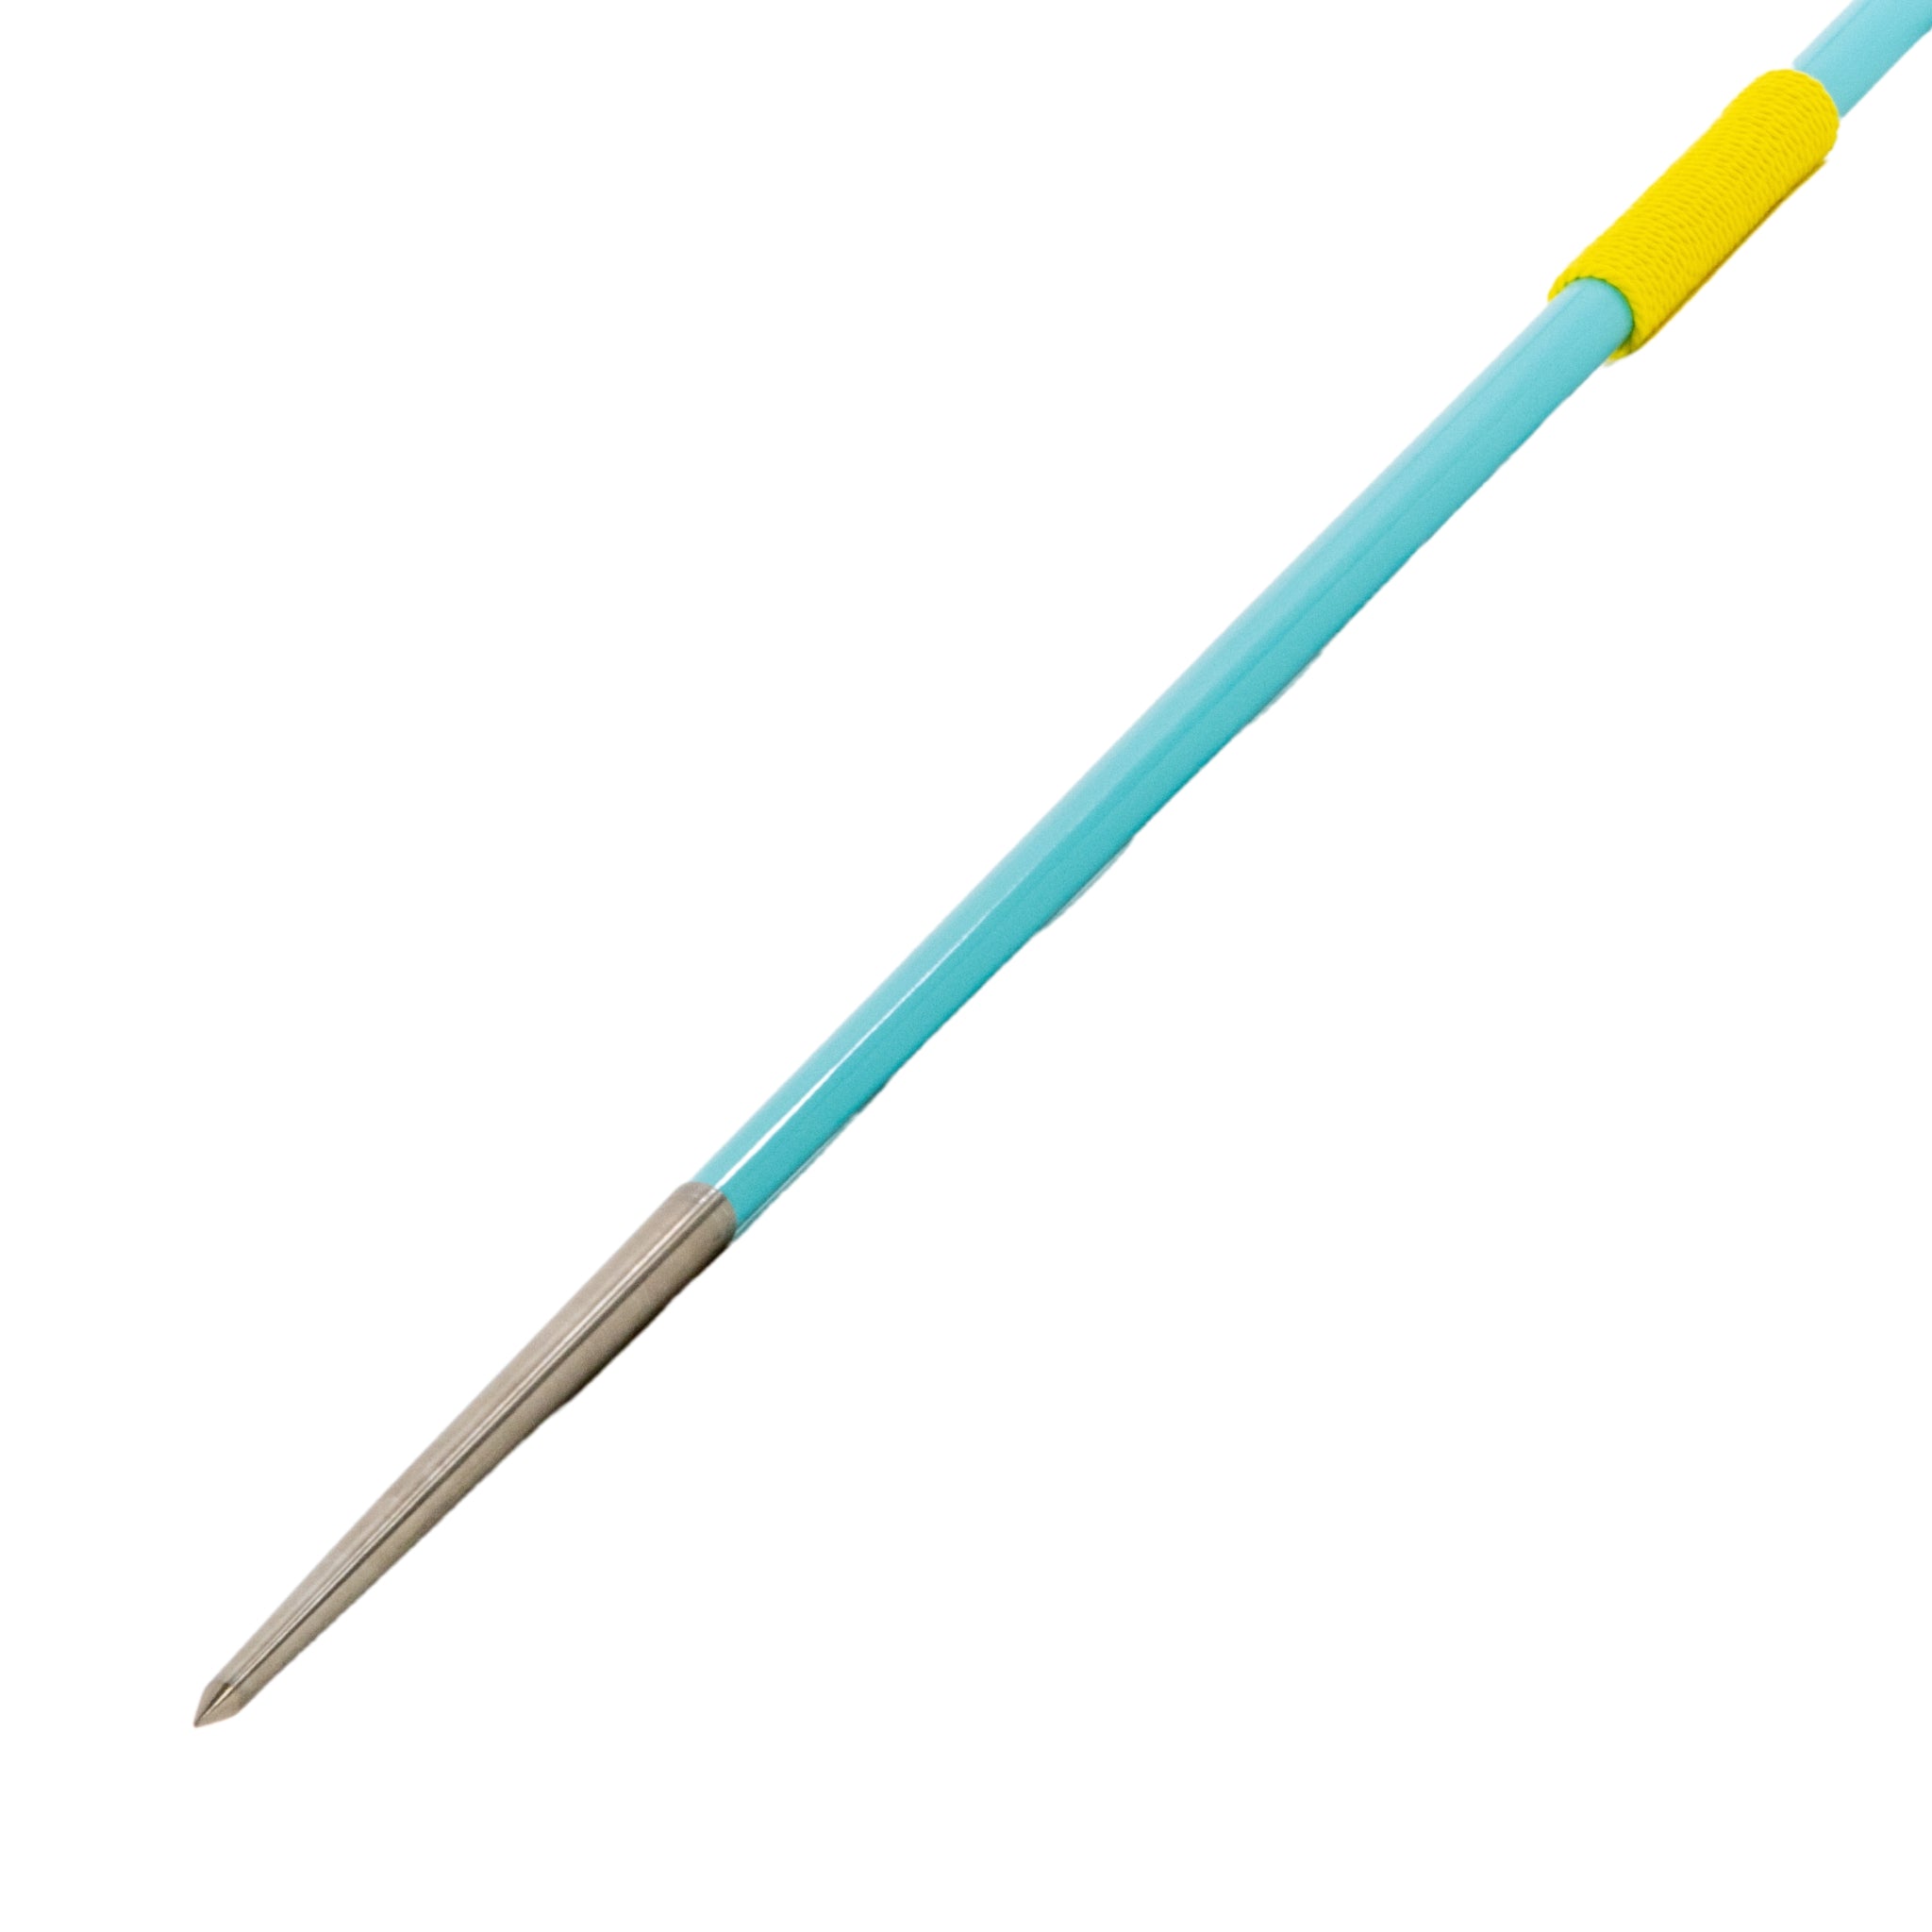 Nordic Viking Javelin | Close up of silver nose, pale blue body and yellow grip cord | 400g 500g 600g 700g 800g